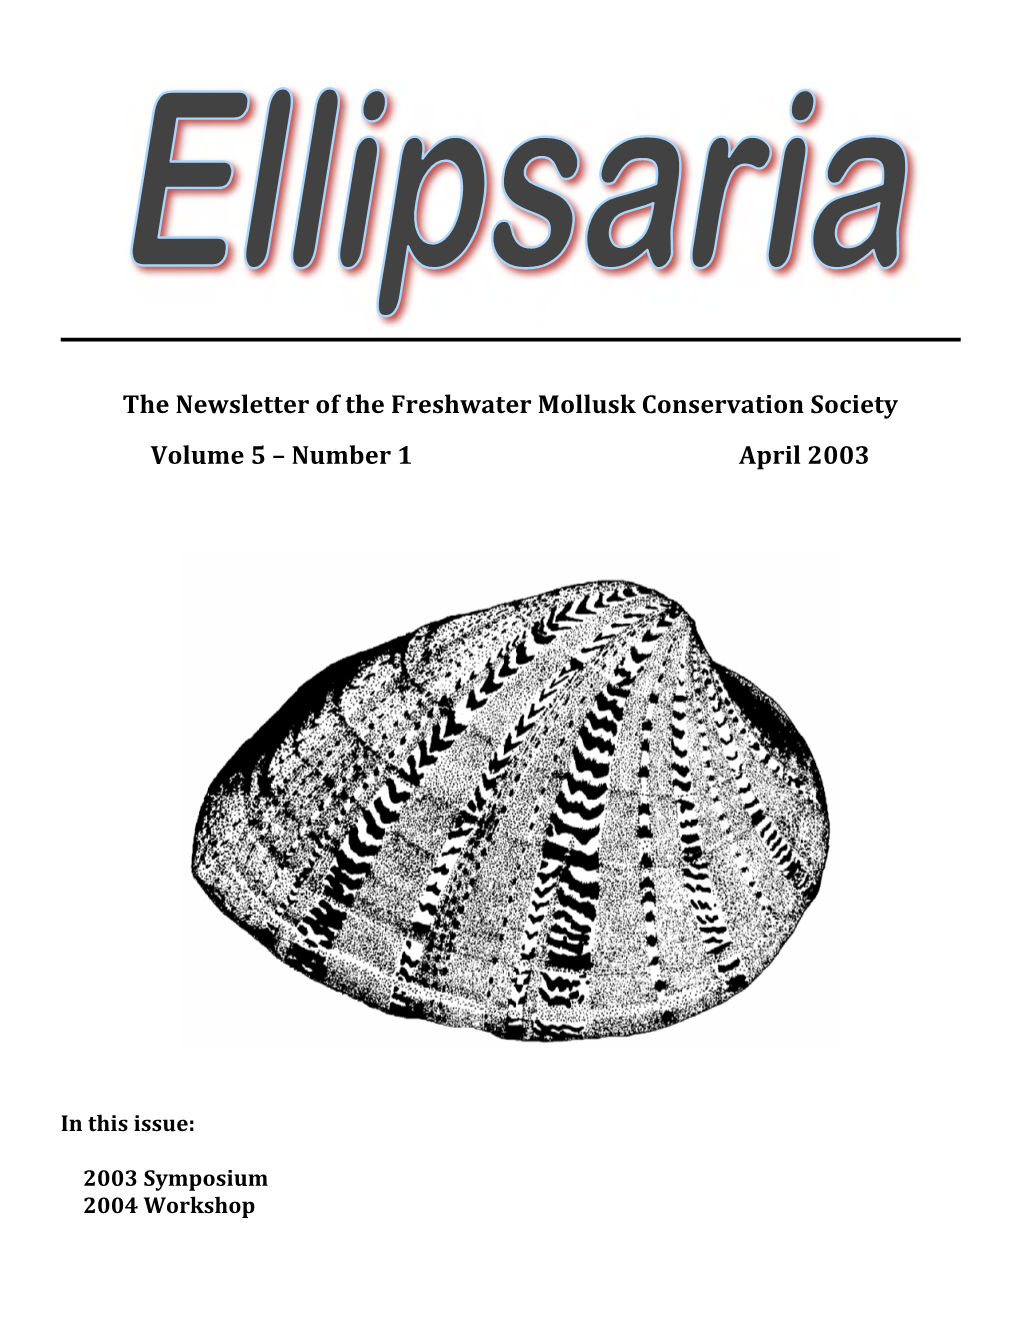 The Newsletter of the Freshwater Mollusk Conservation Society Volume 5 – Number 1 April 2003